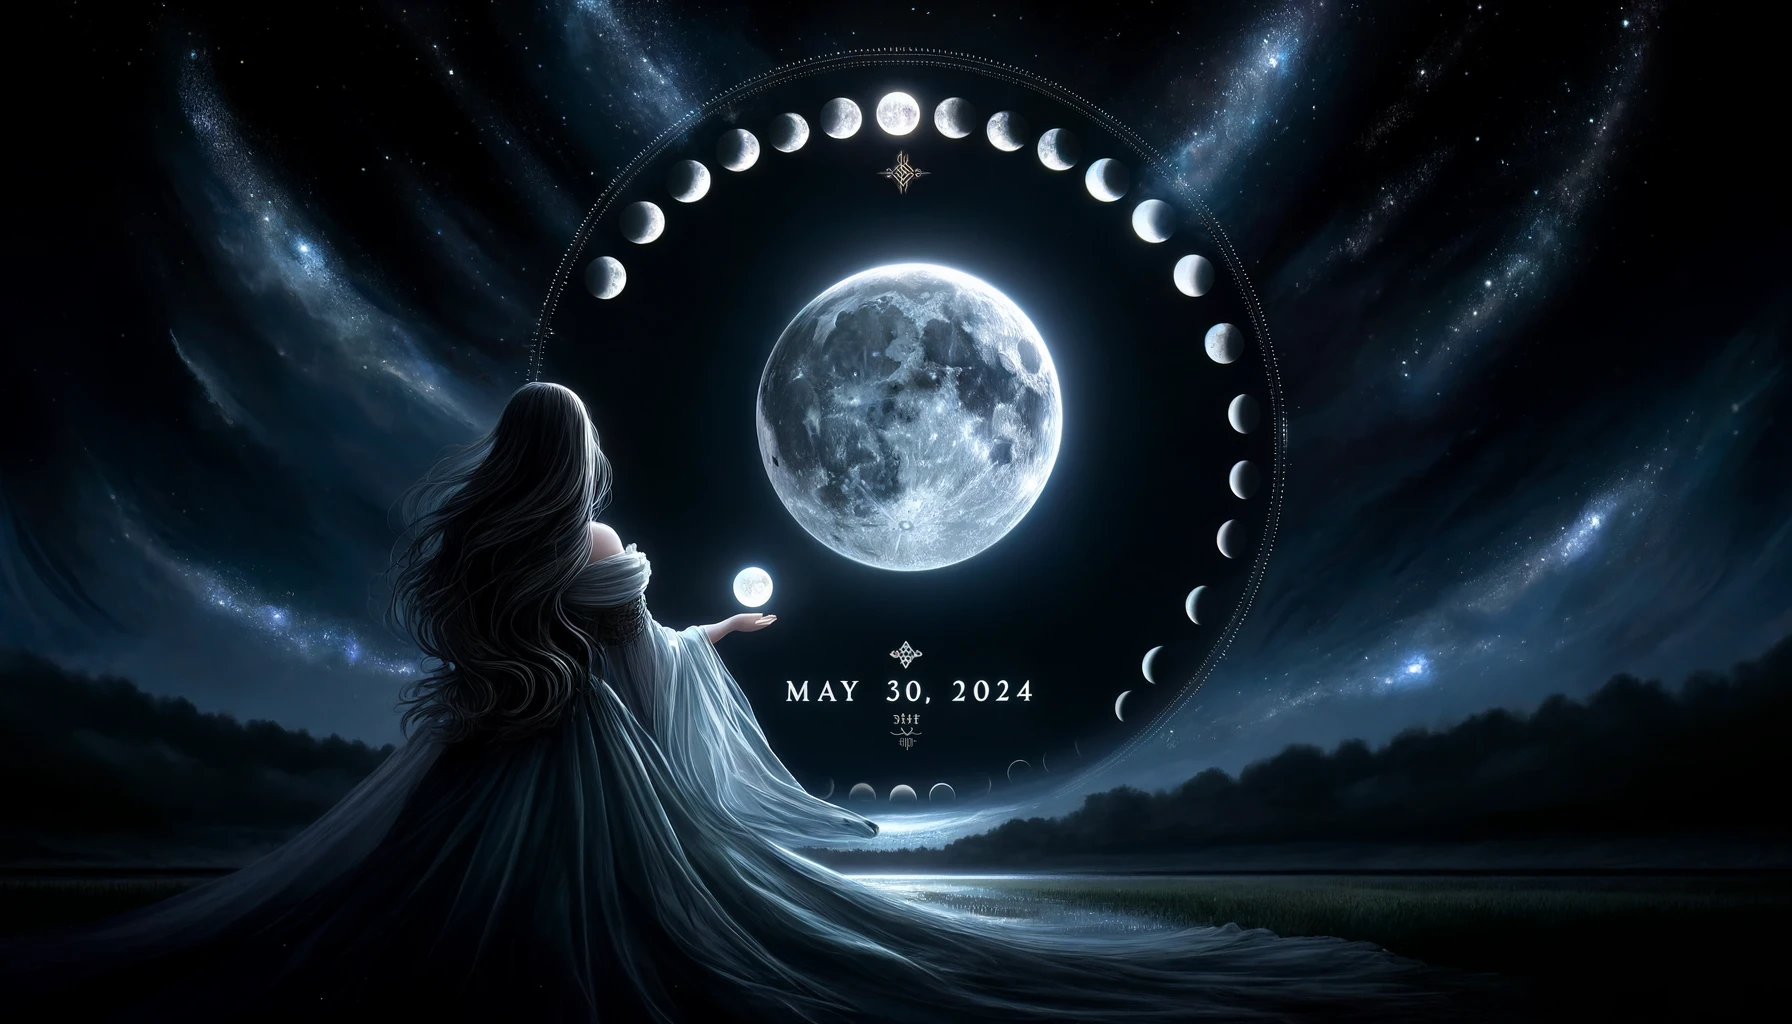 Moon Matters: May 30, 2024 - Your Guide to Lunar Insights